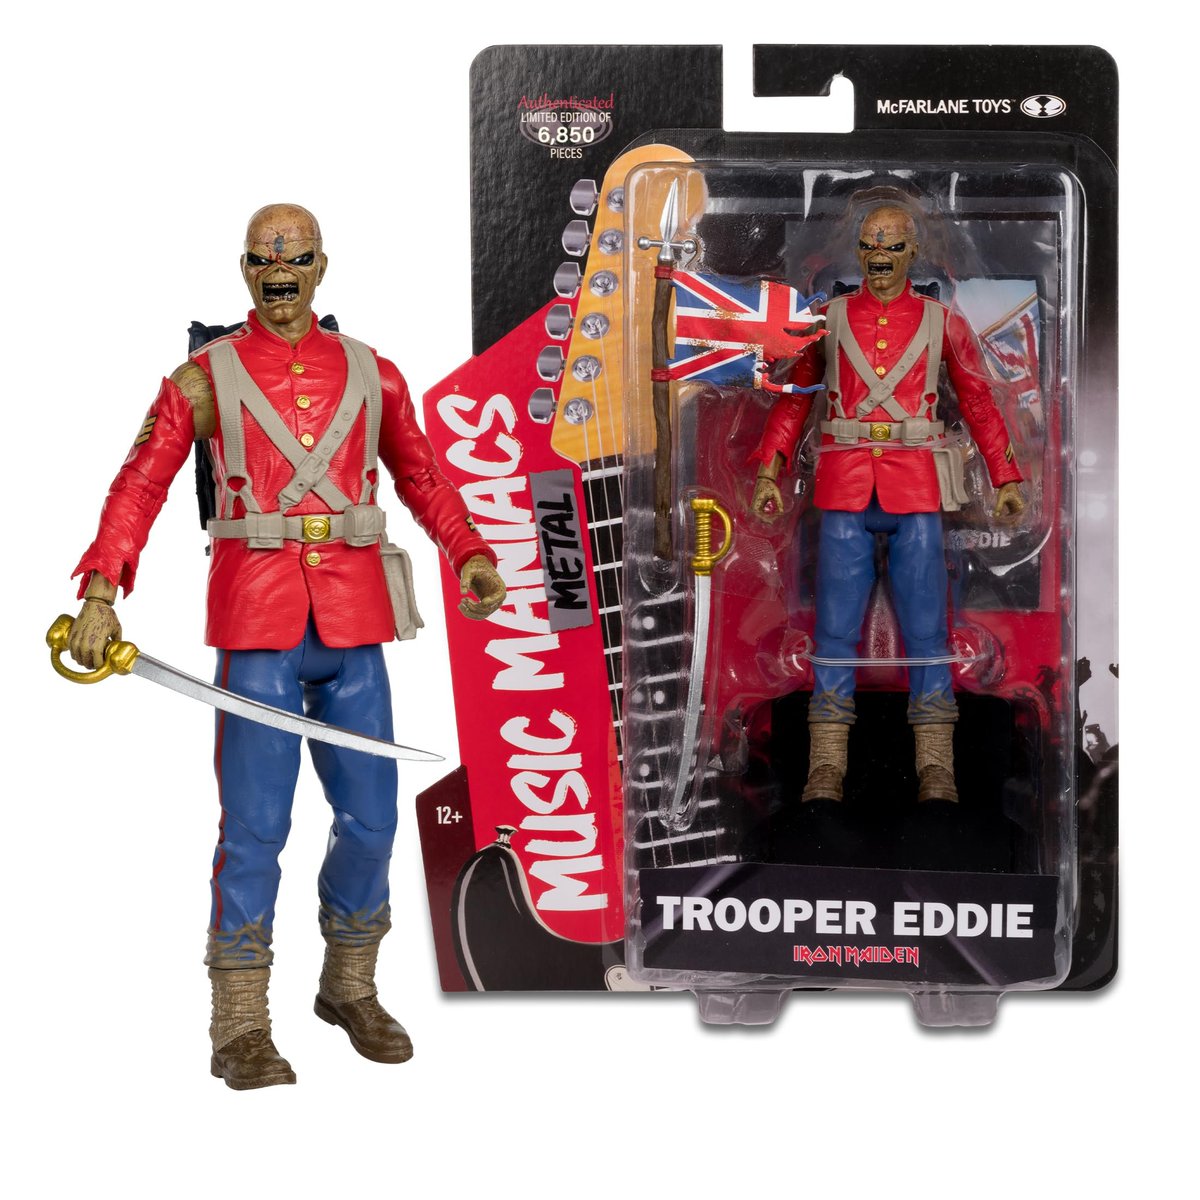 McFarlane Toys Music Maniacs 6' Iron Maiden's Trooper Eddie is up for preorder on Amazon ($24.99) - amzn.to/4b0xab6 #ad